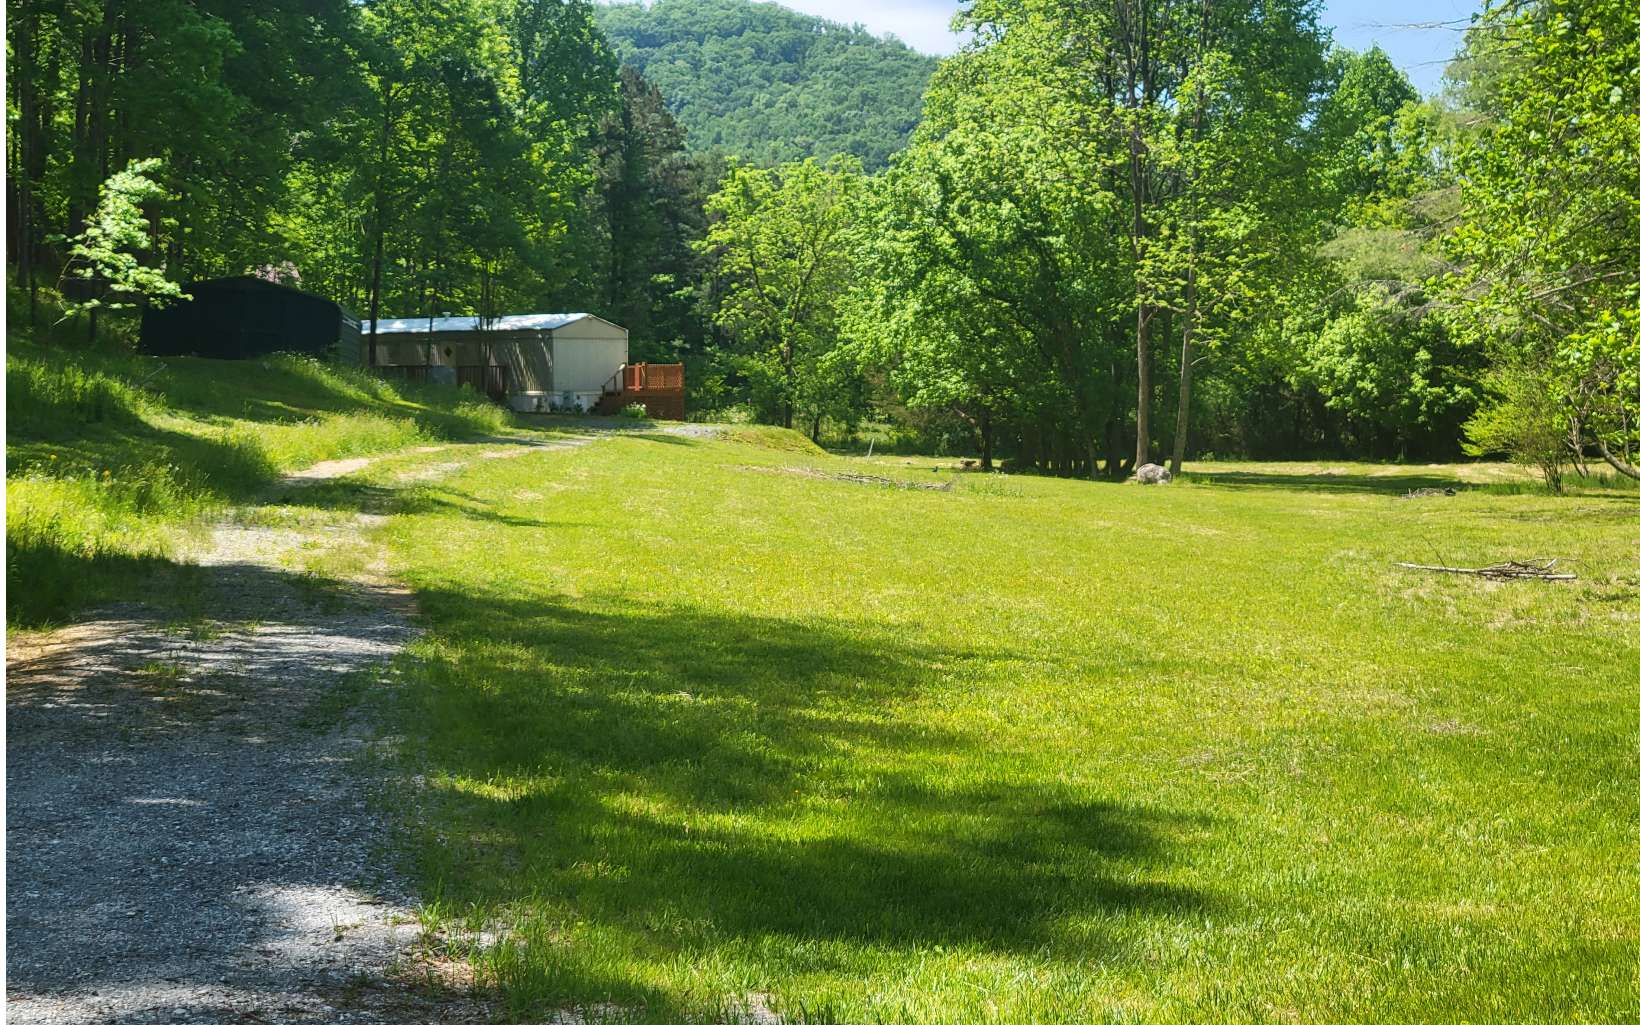 98 WOLFORTS ROOST, Hayesville, NC 28904